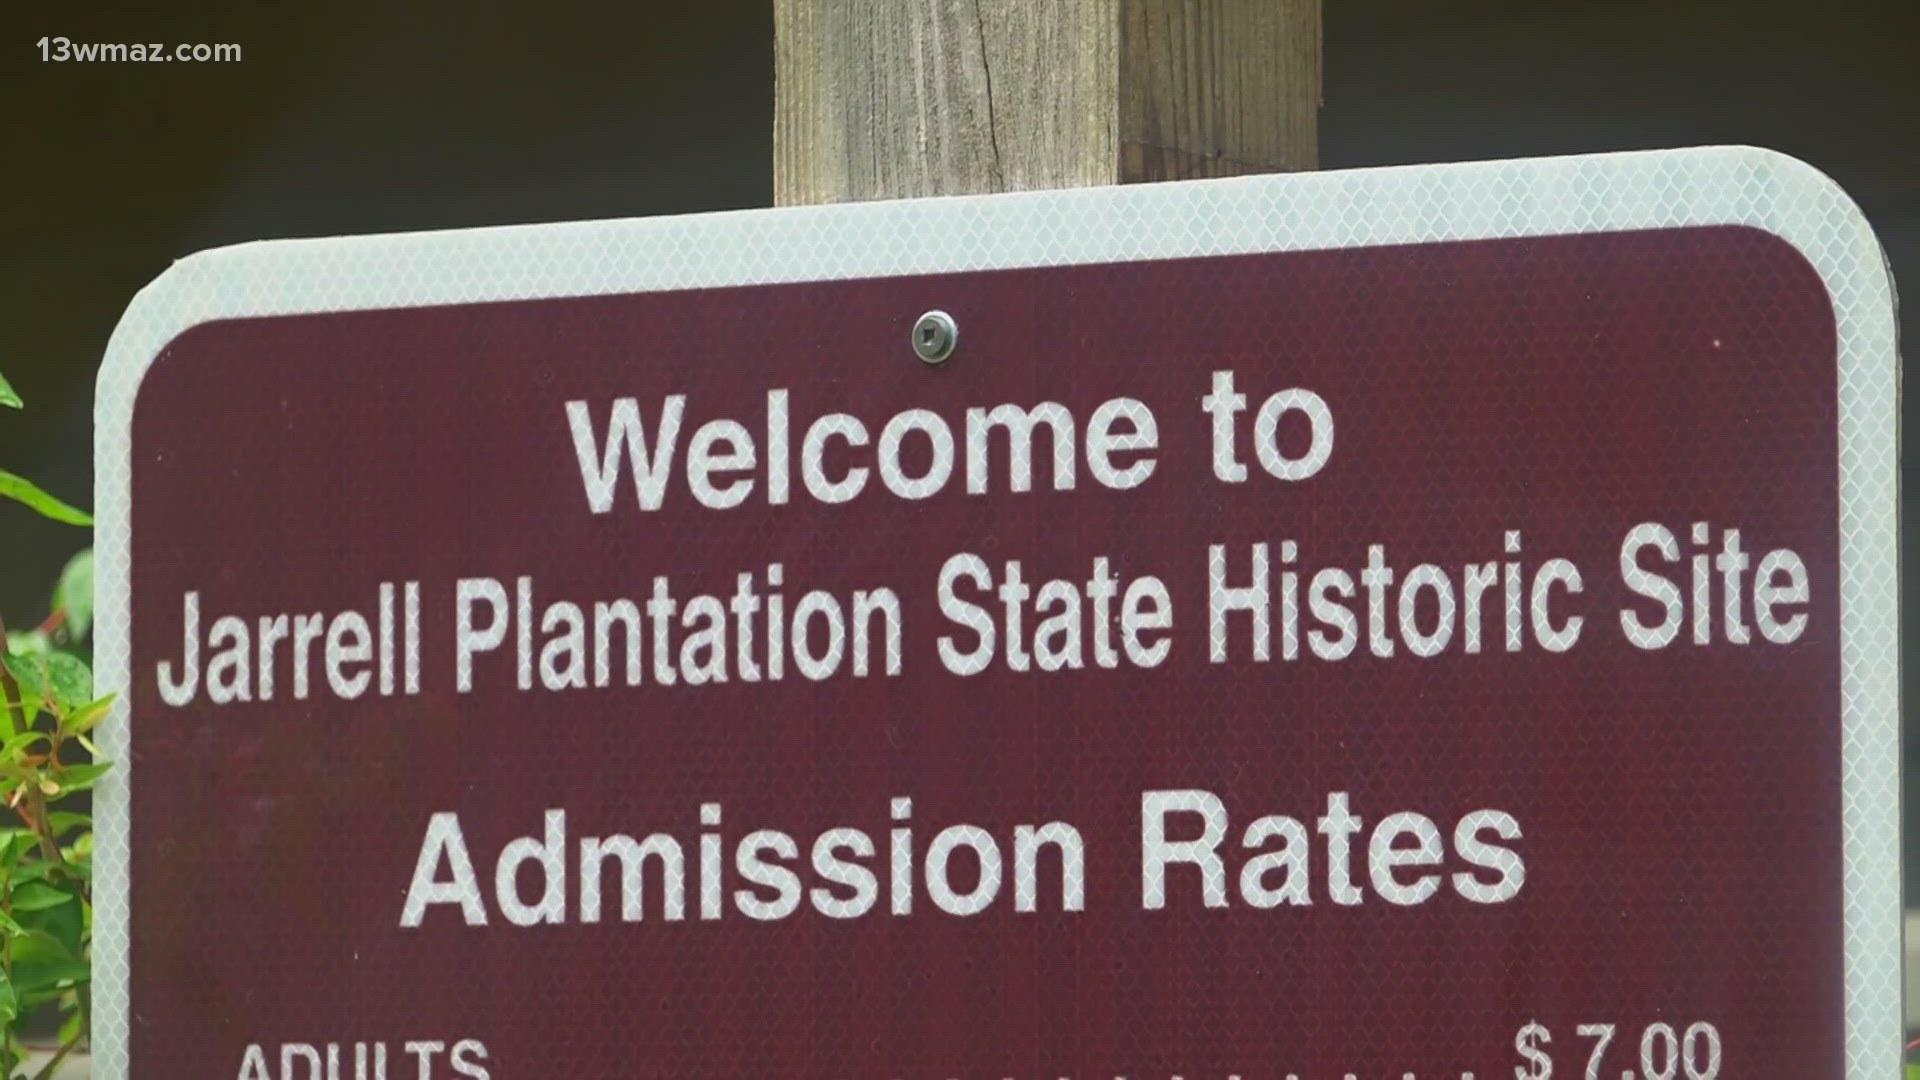 The Jones County plantation has been holding its annual July 4th celebration for nearly 50 years now.